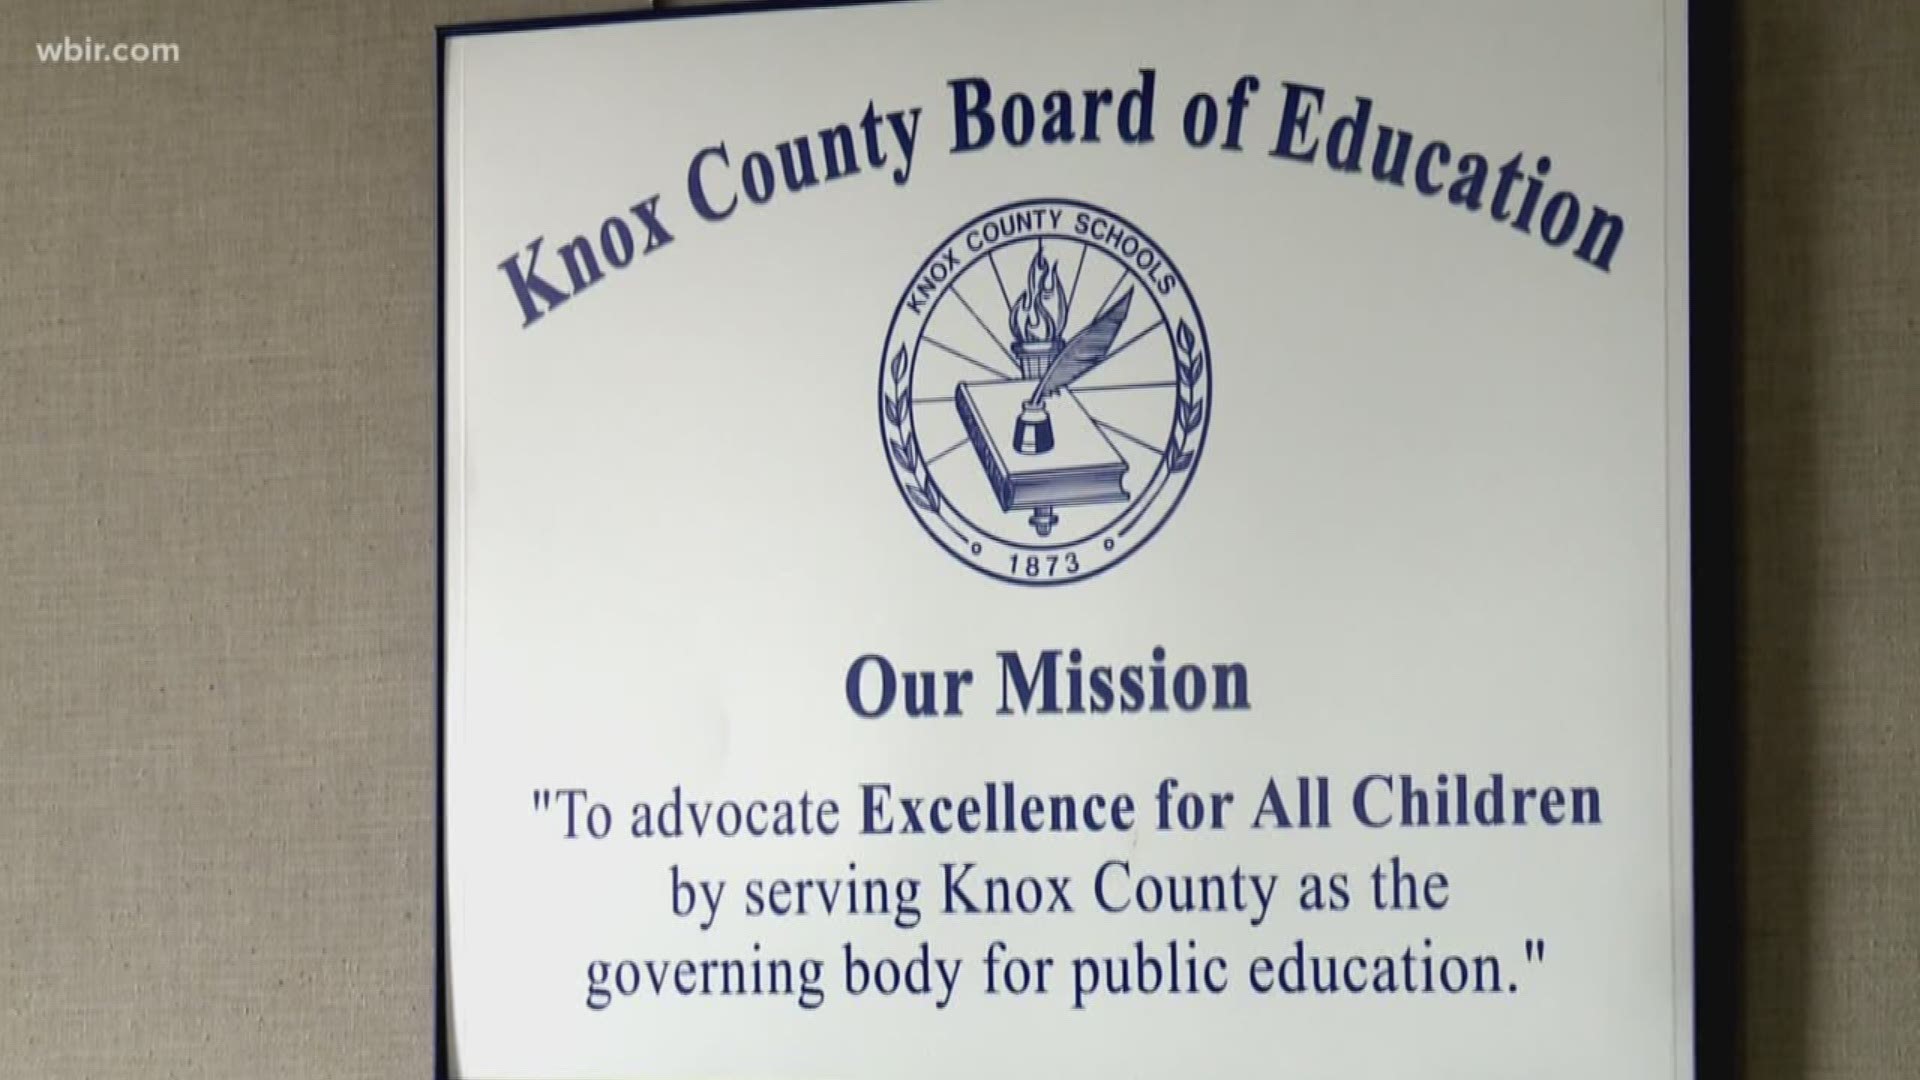 The Knox County Board of Education approved Wednesday a recommendation for additional funding for magnet schools and gifted and talented programs.